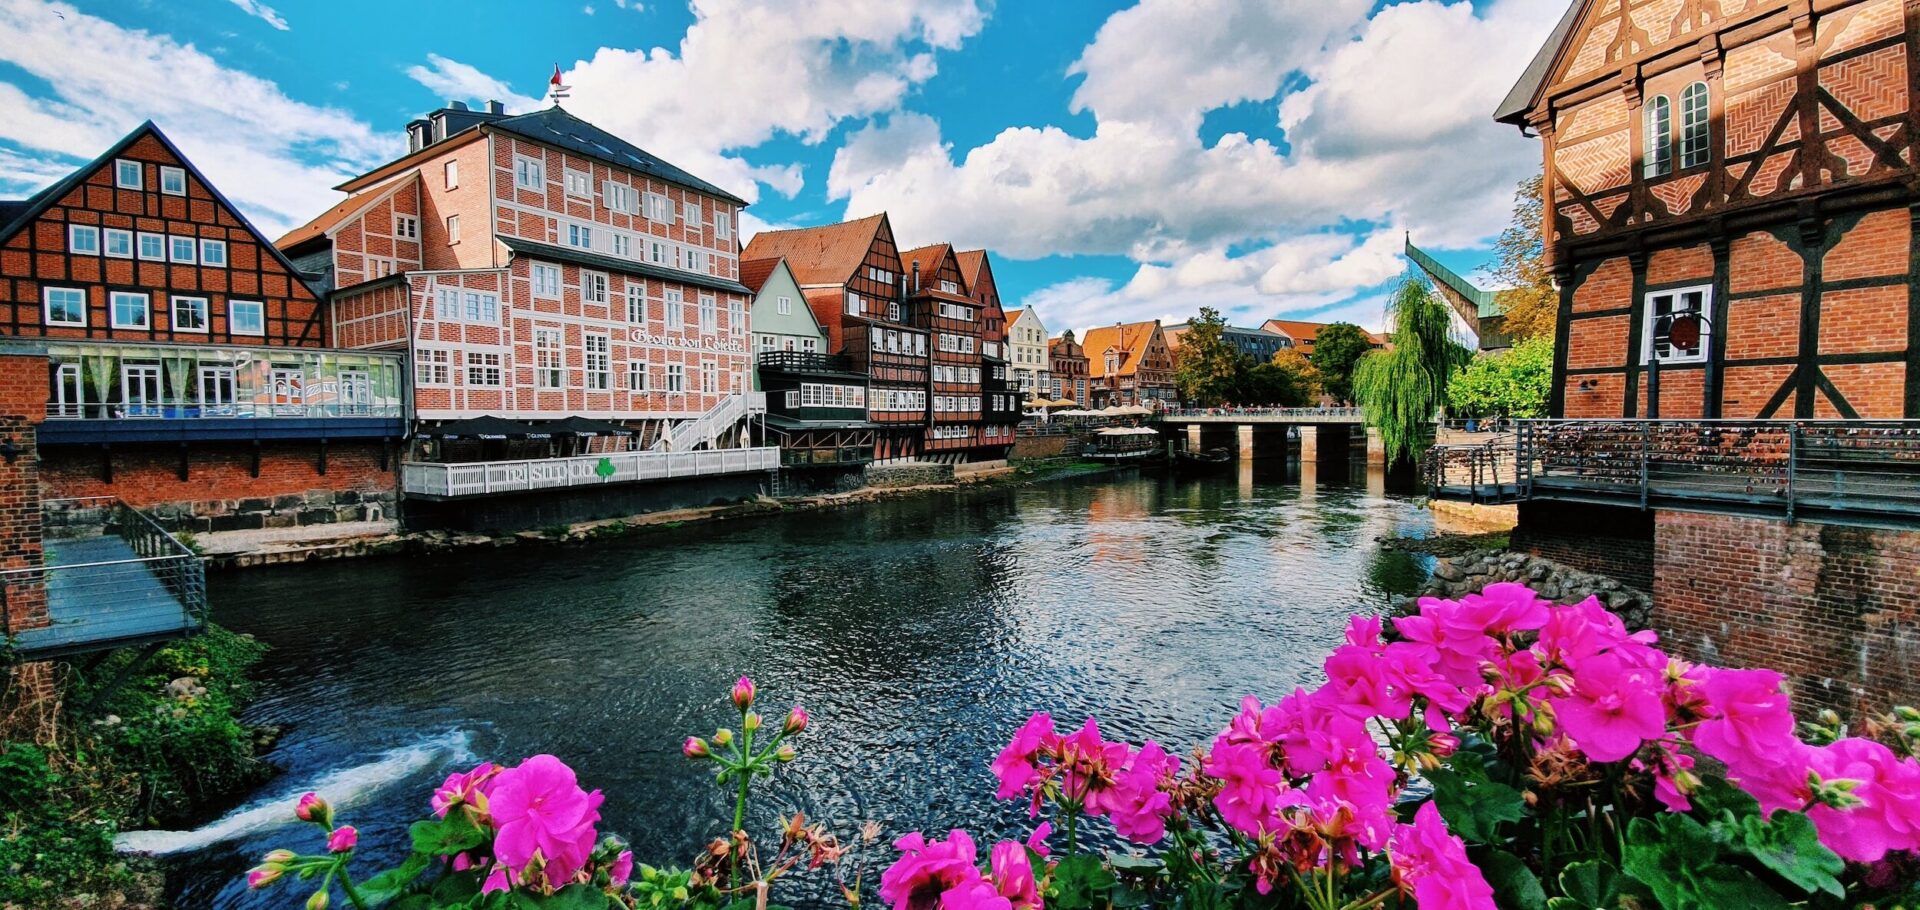 Exploring the Rich Cultural Heritage of Northern Germany: From Hanseatic League to Modern-Day